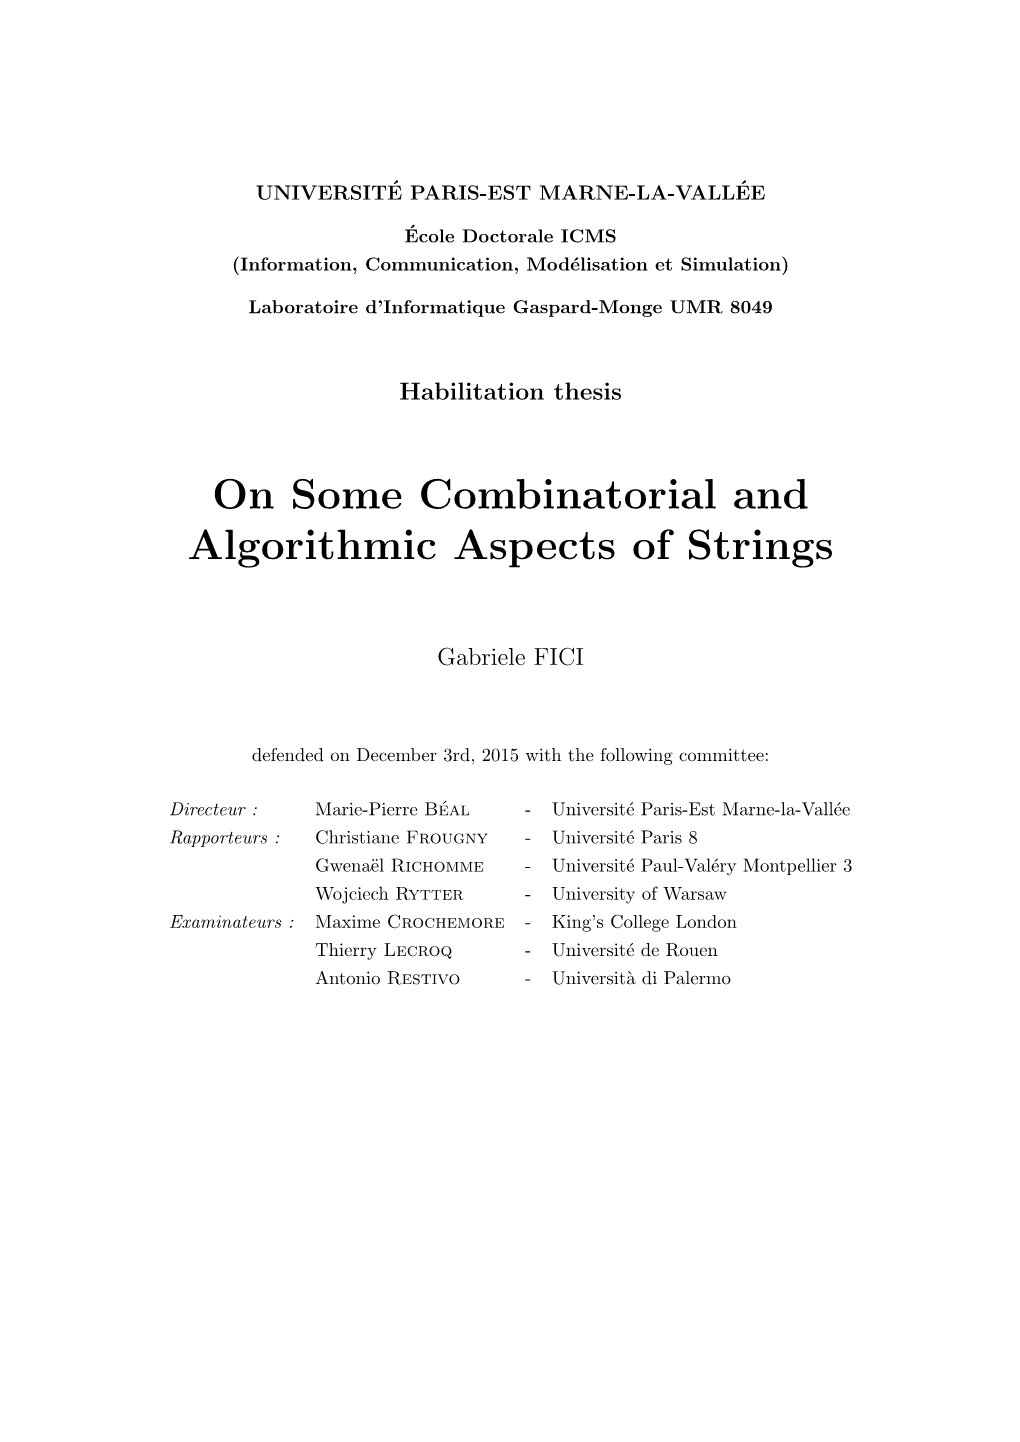 On Some Combinatorial and Algorithmic Aspects of Strings